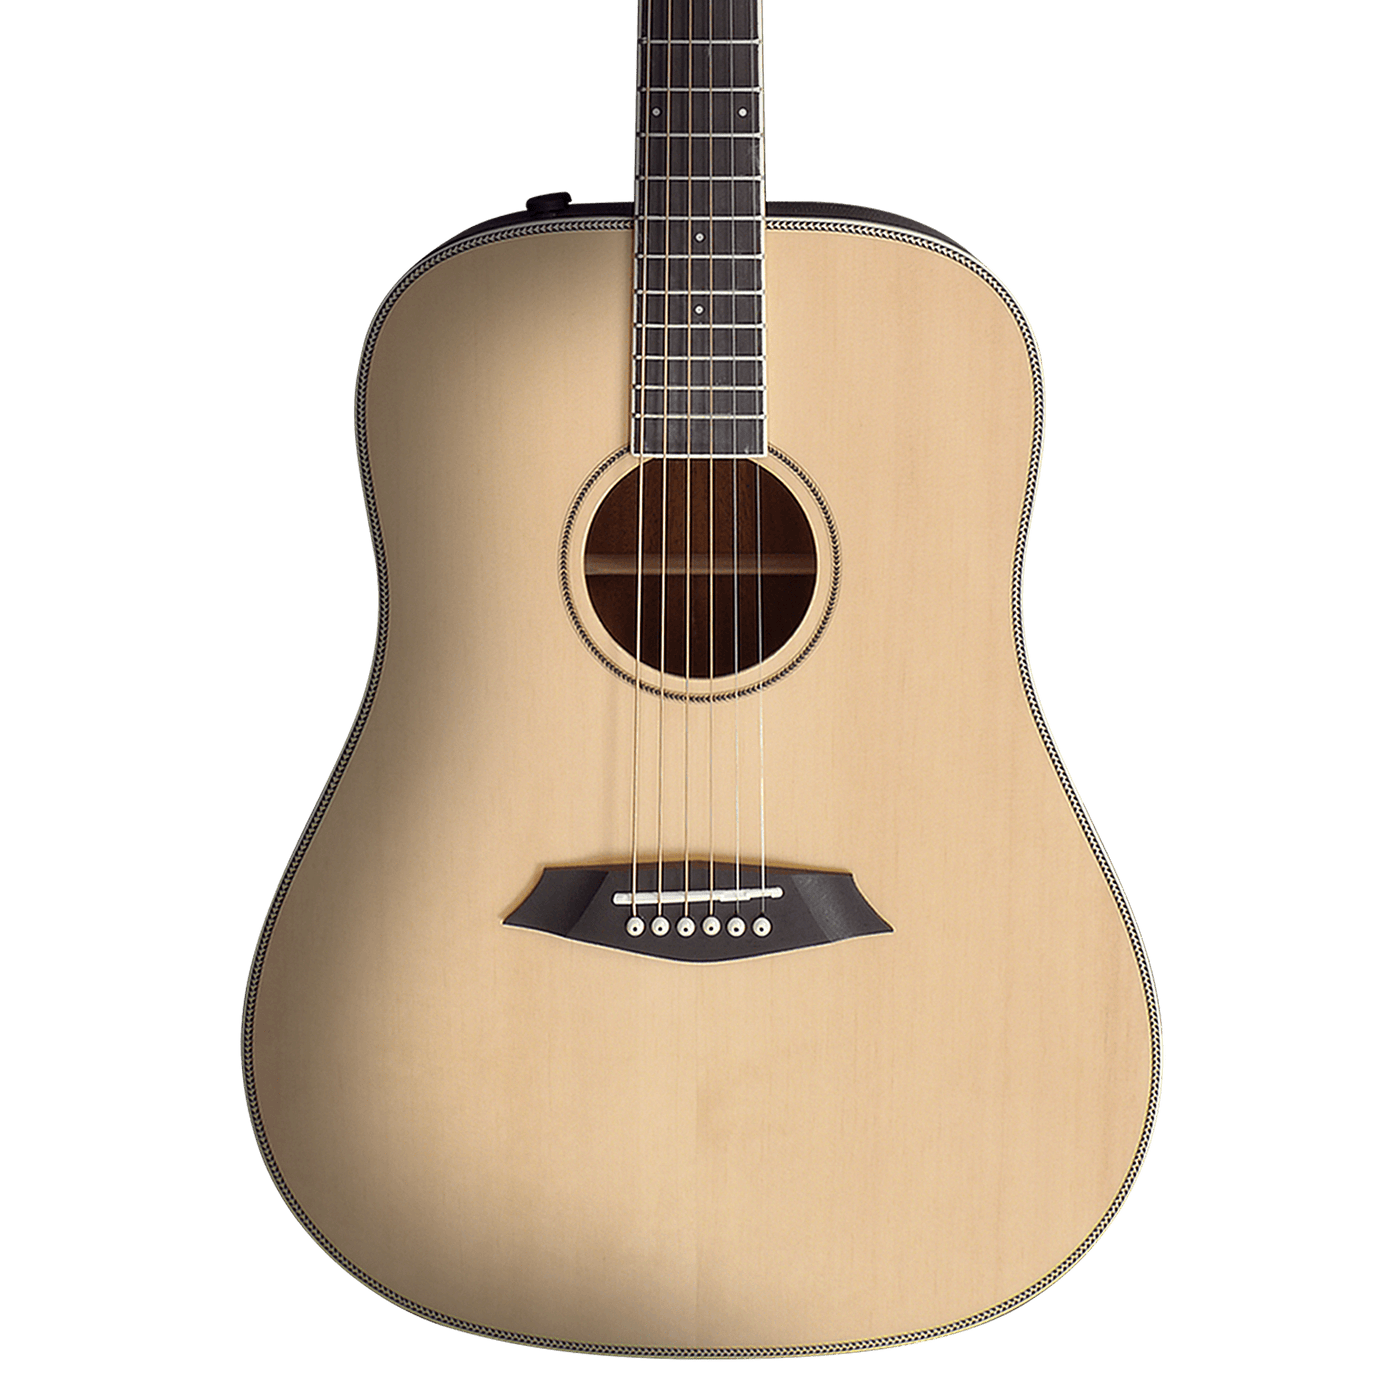 Sire A3-D Natural - $699990 - Gearhub - The Sire A3 is the pioneer solid top acoustic guitar in the Larry Carlton acoustic guitars line, which offers equilibrium between the cutting-edge design and excellent performance. The A3 has two body shapes, Dreadnought and Grand Auditorium. It's added with the custom shop feature rolled fretboard edges to provide a more comfortable, and natural grip. Cuerpo • Modelo: Larry Carlton A3-D (Dreadnought)• Top: Roasted Solid Spruce• Sides: Mahogany• Top: Solid Mahogany •